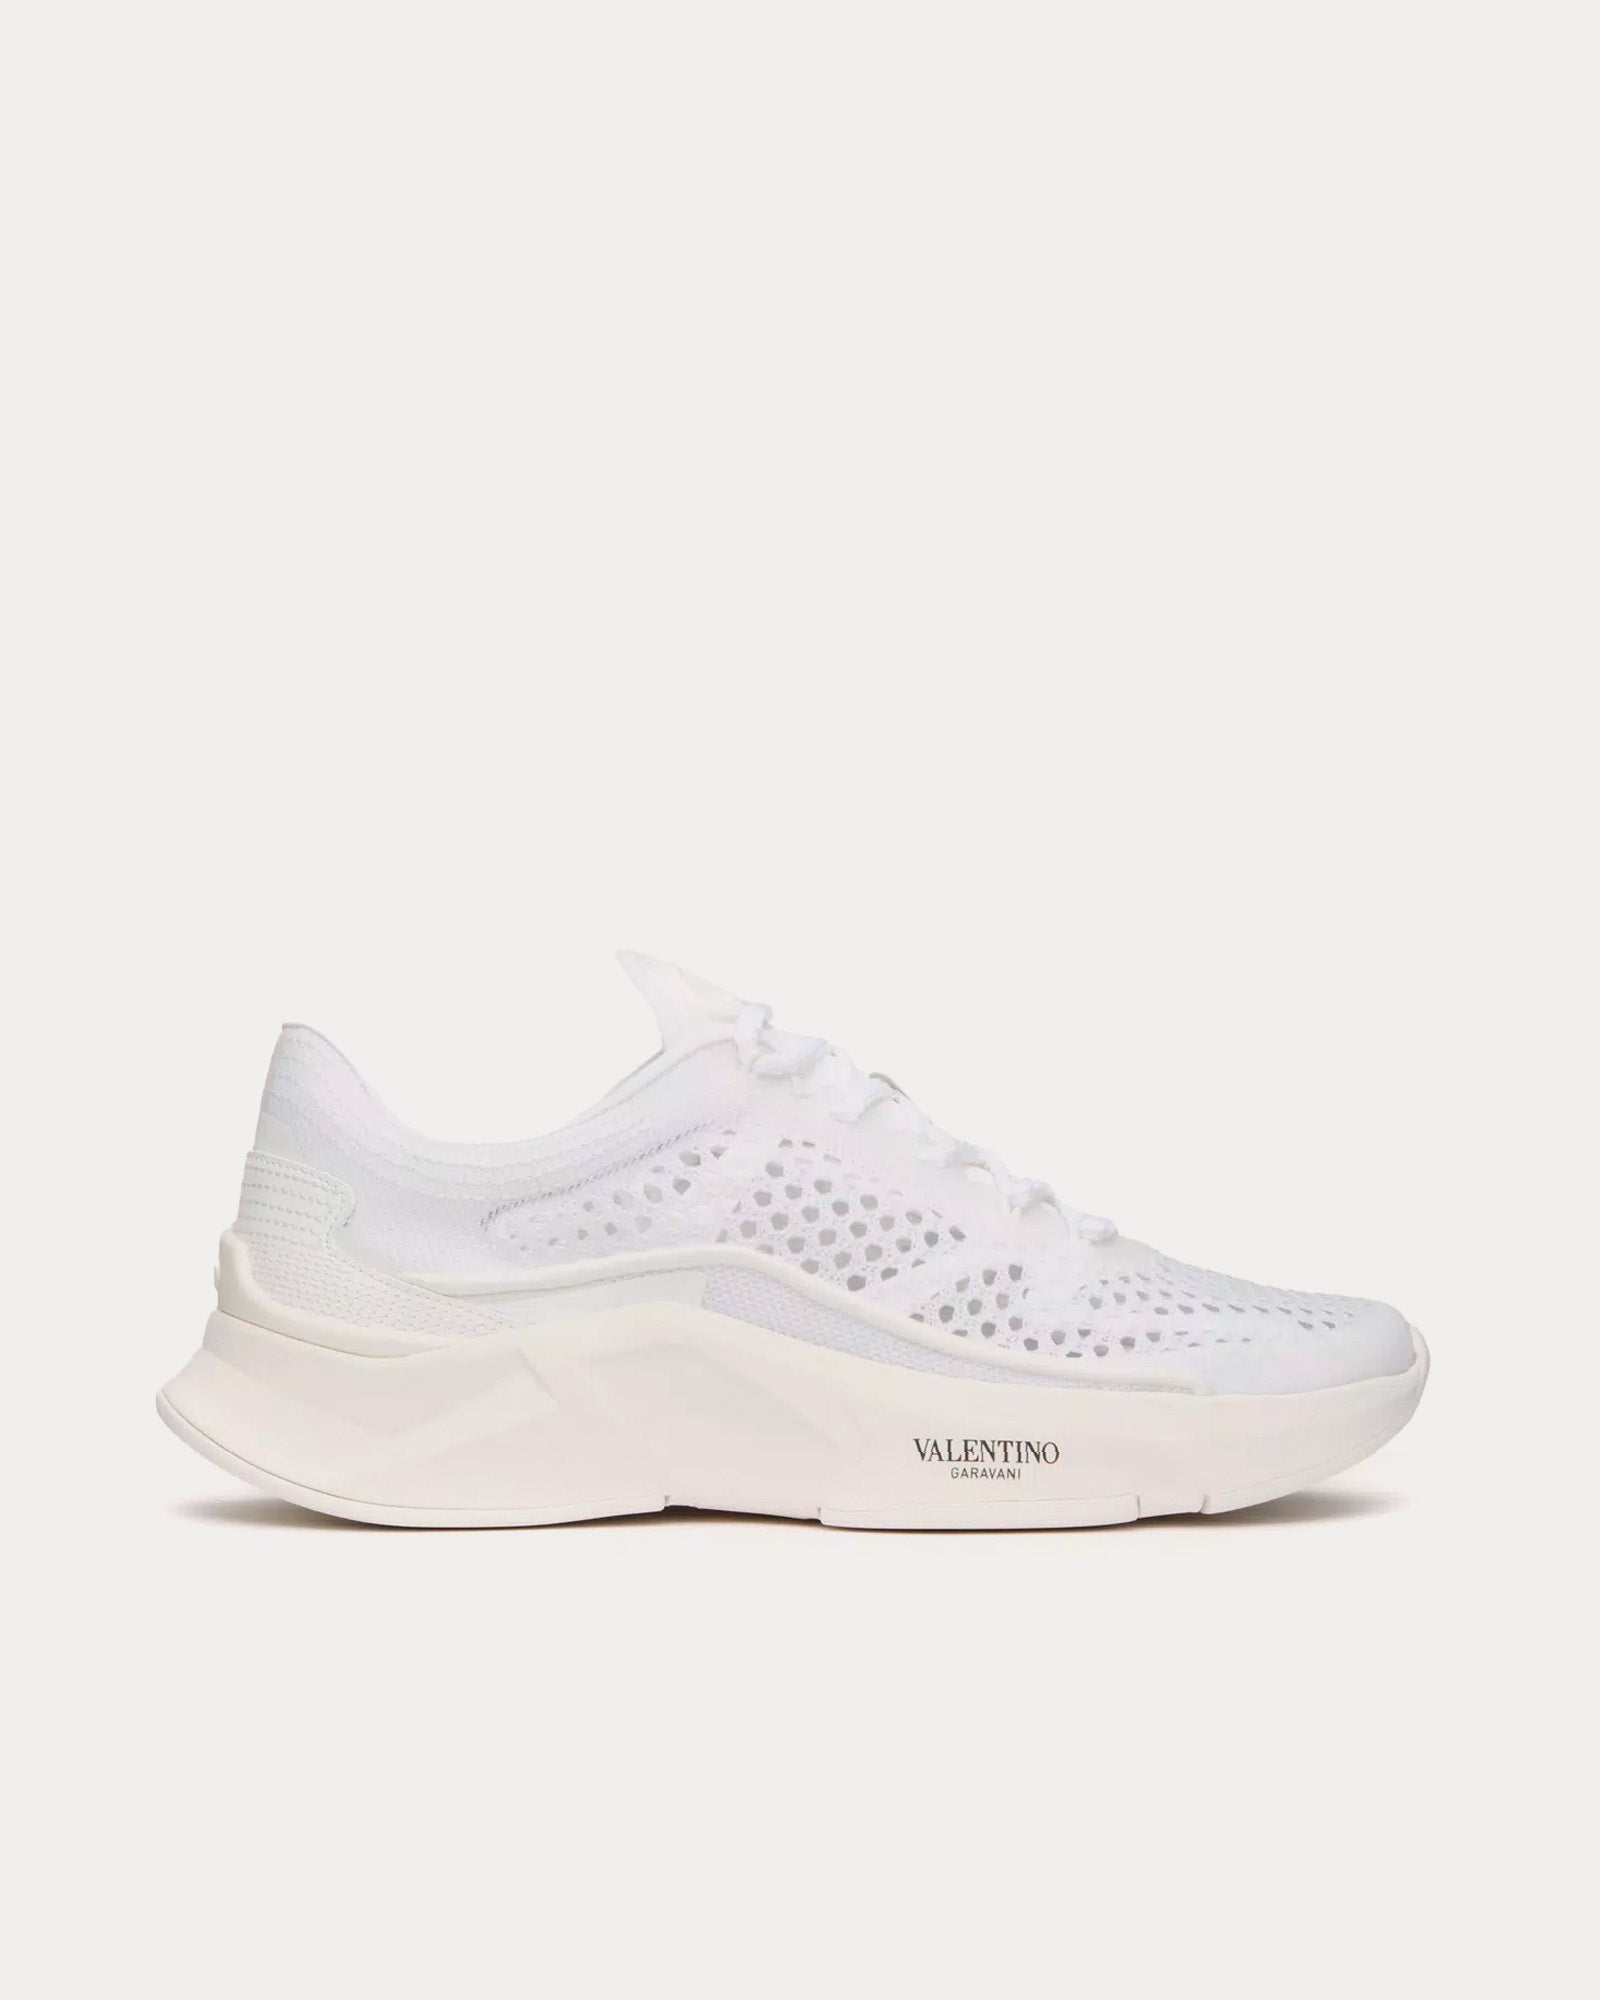 Valentino - True Actress Mesh White Low Top Sneakers